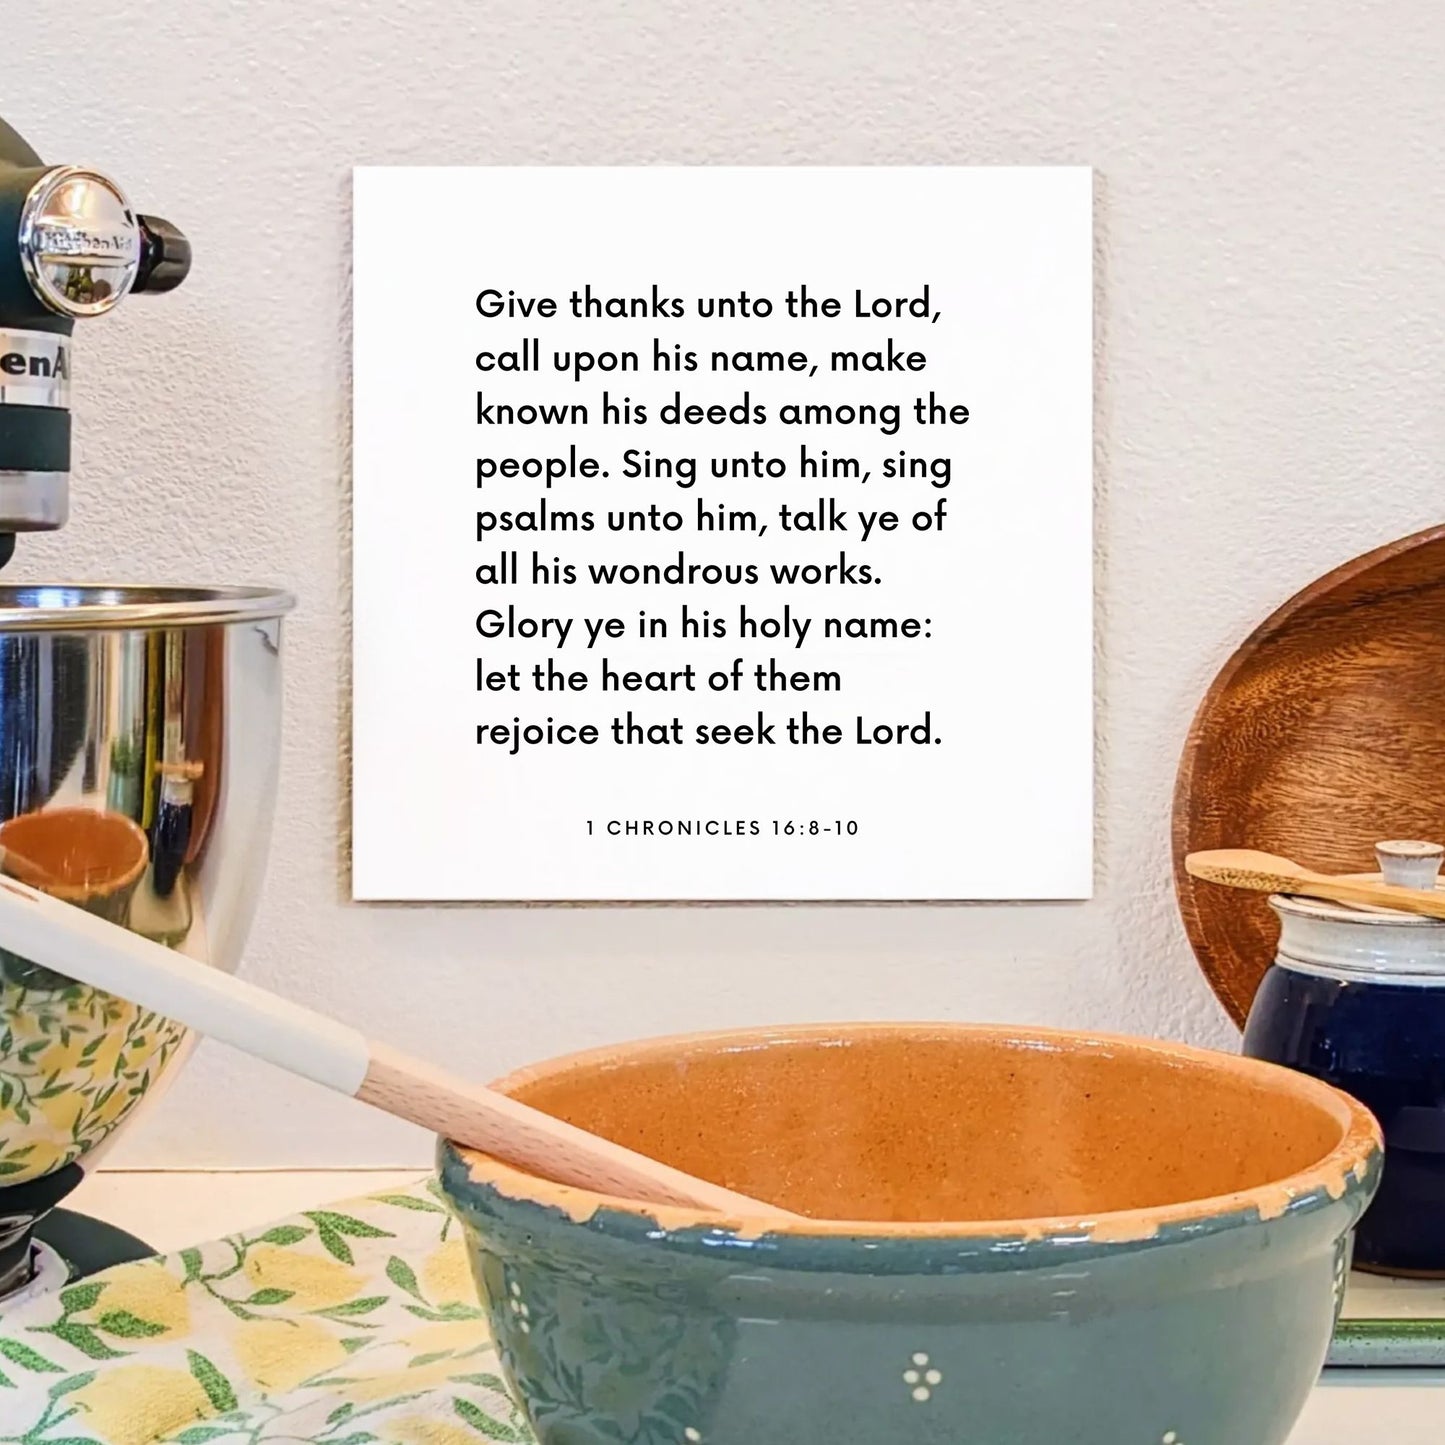 Kitchen mouting of the scripture tile for 1 Chronicles 16:8-10 - "Give thanks unto the Lord, call upon his name"